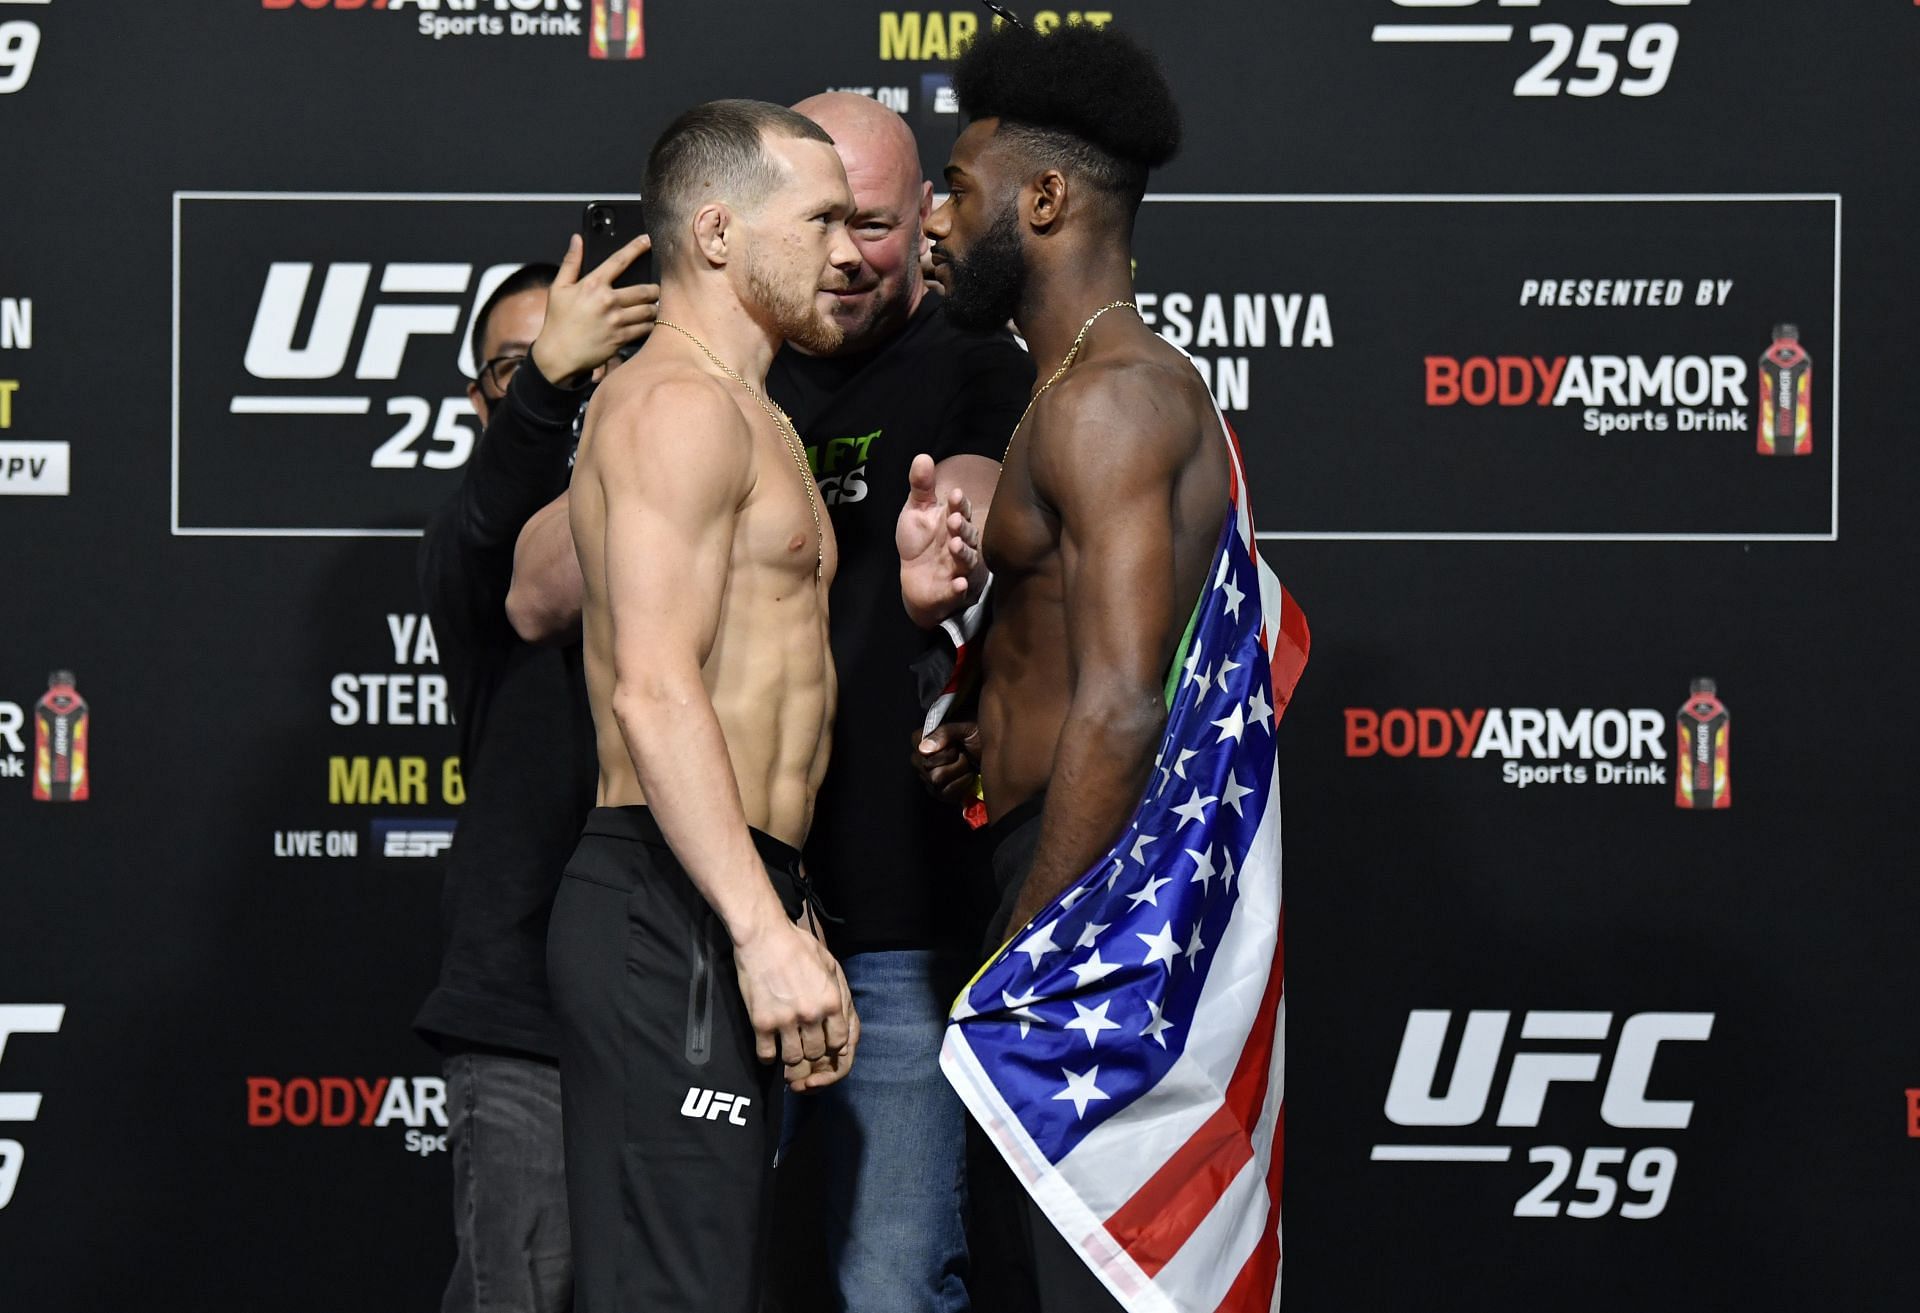 UFC 259 Weigh-Ins: Yan vs. Sterling face off